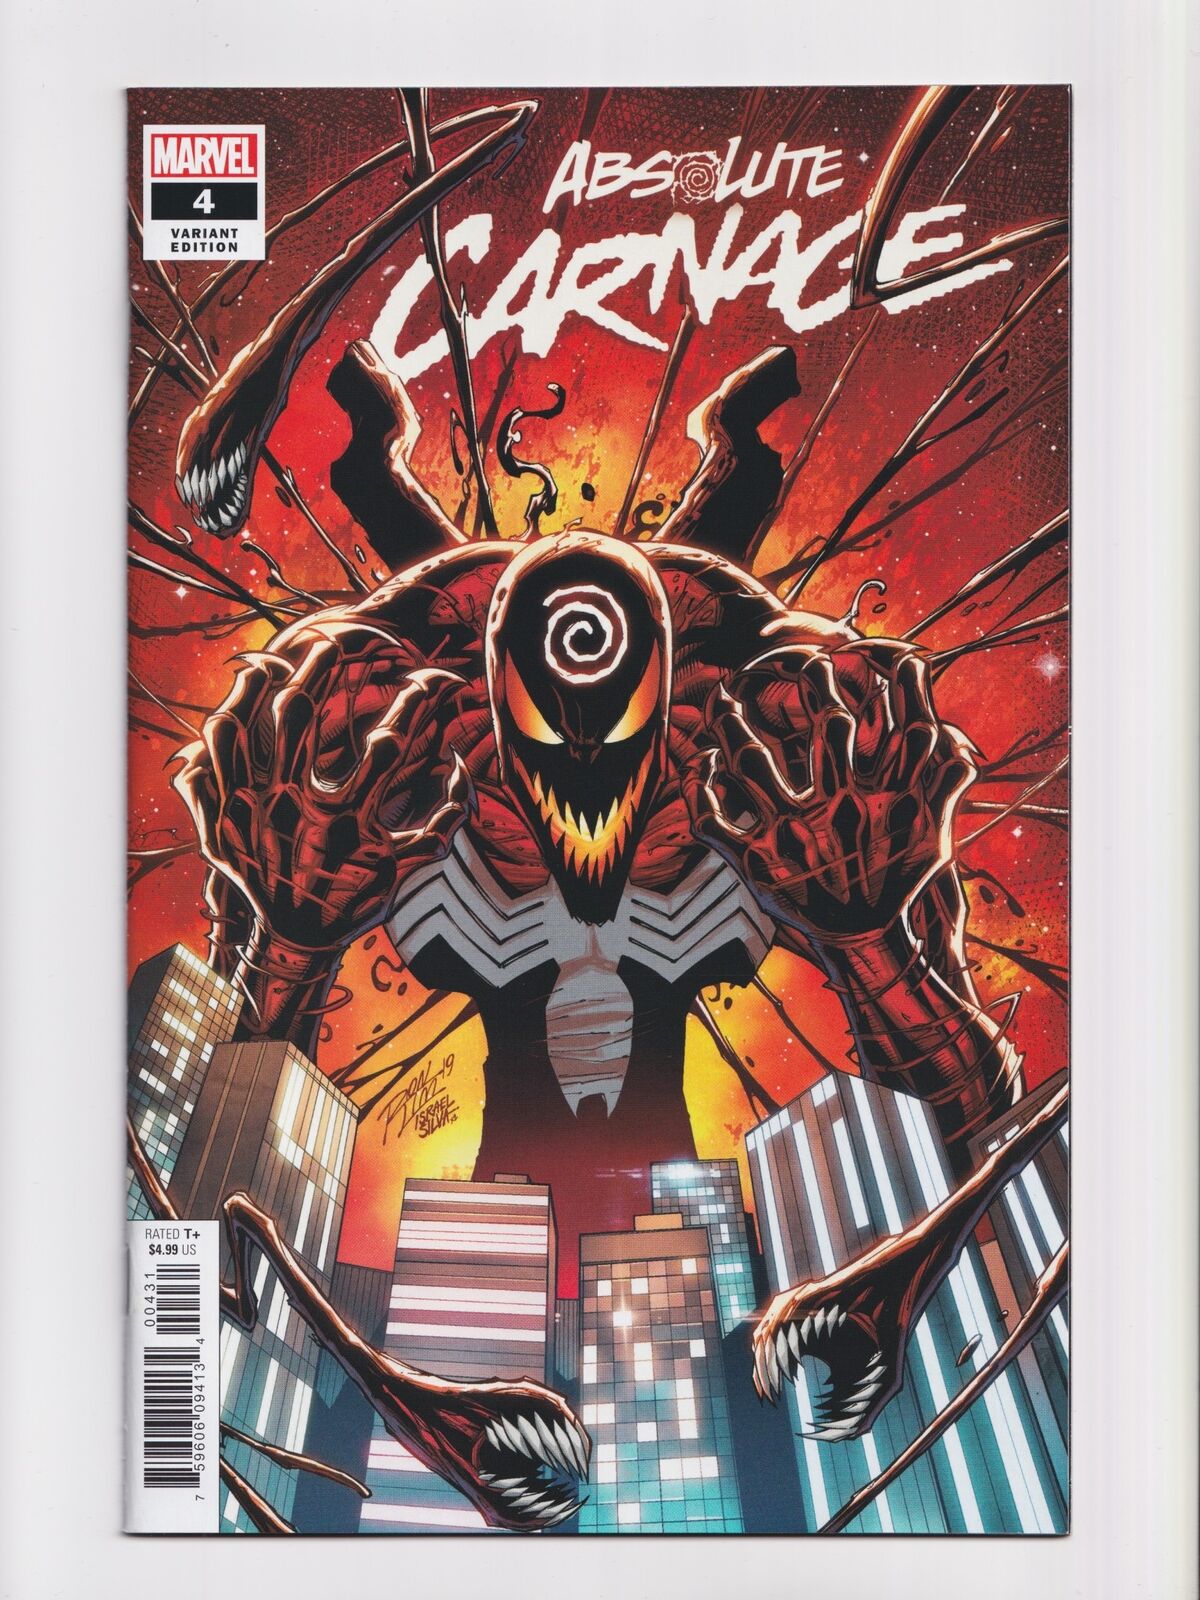 Absolute Carnage #4 Marvel 2019 Variant Cover Comic Book NM+